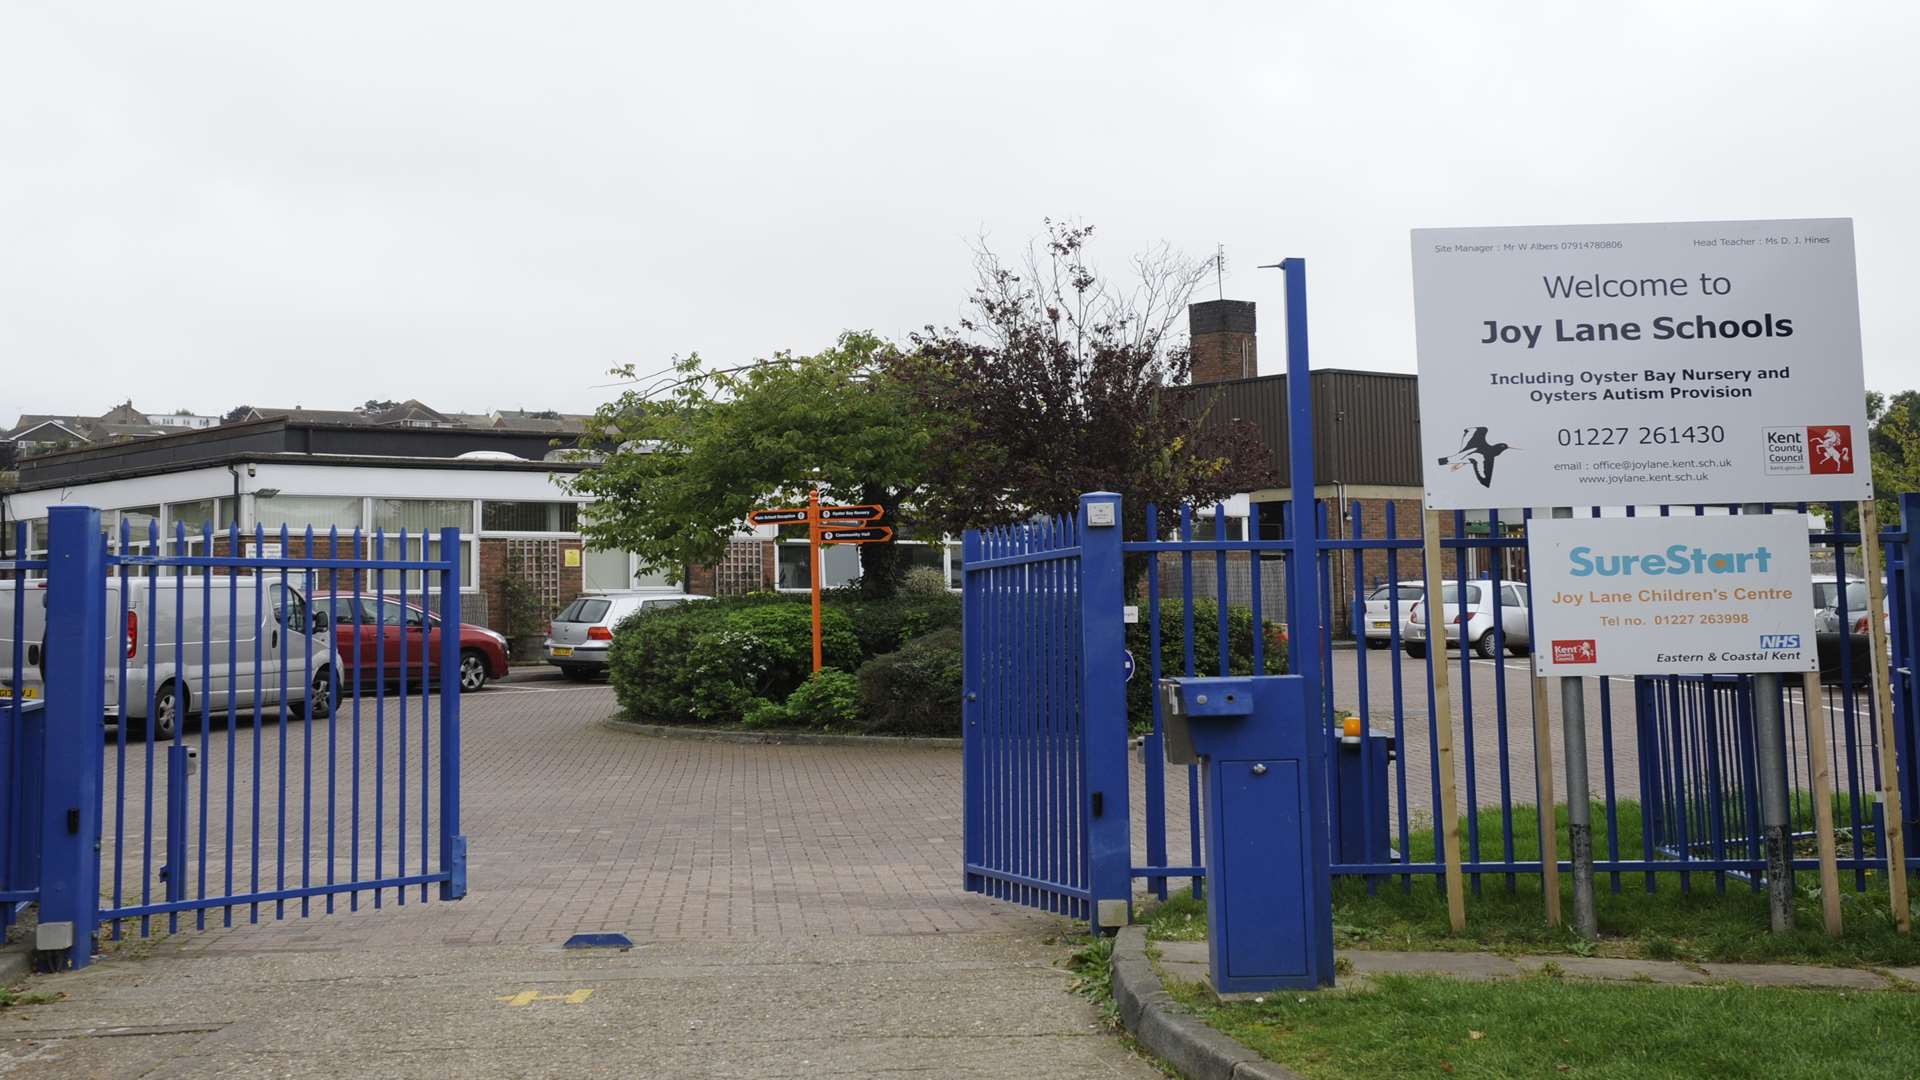 The centre is set to be demolished as part of plans to expand Joy Lane Primary School.